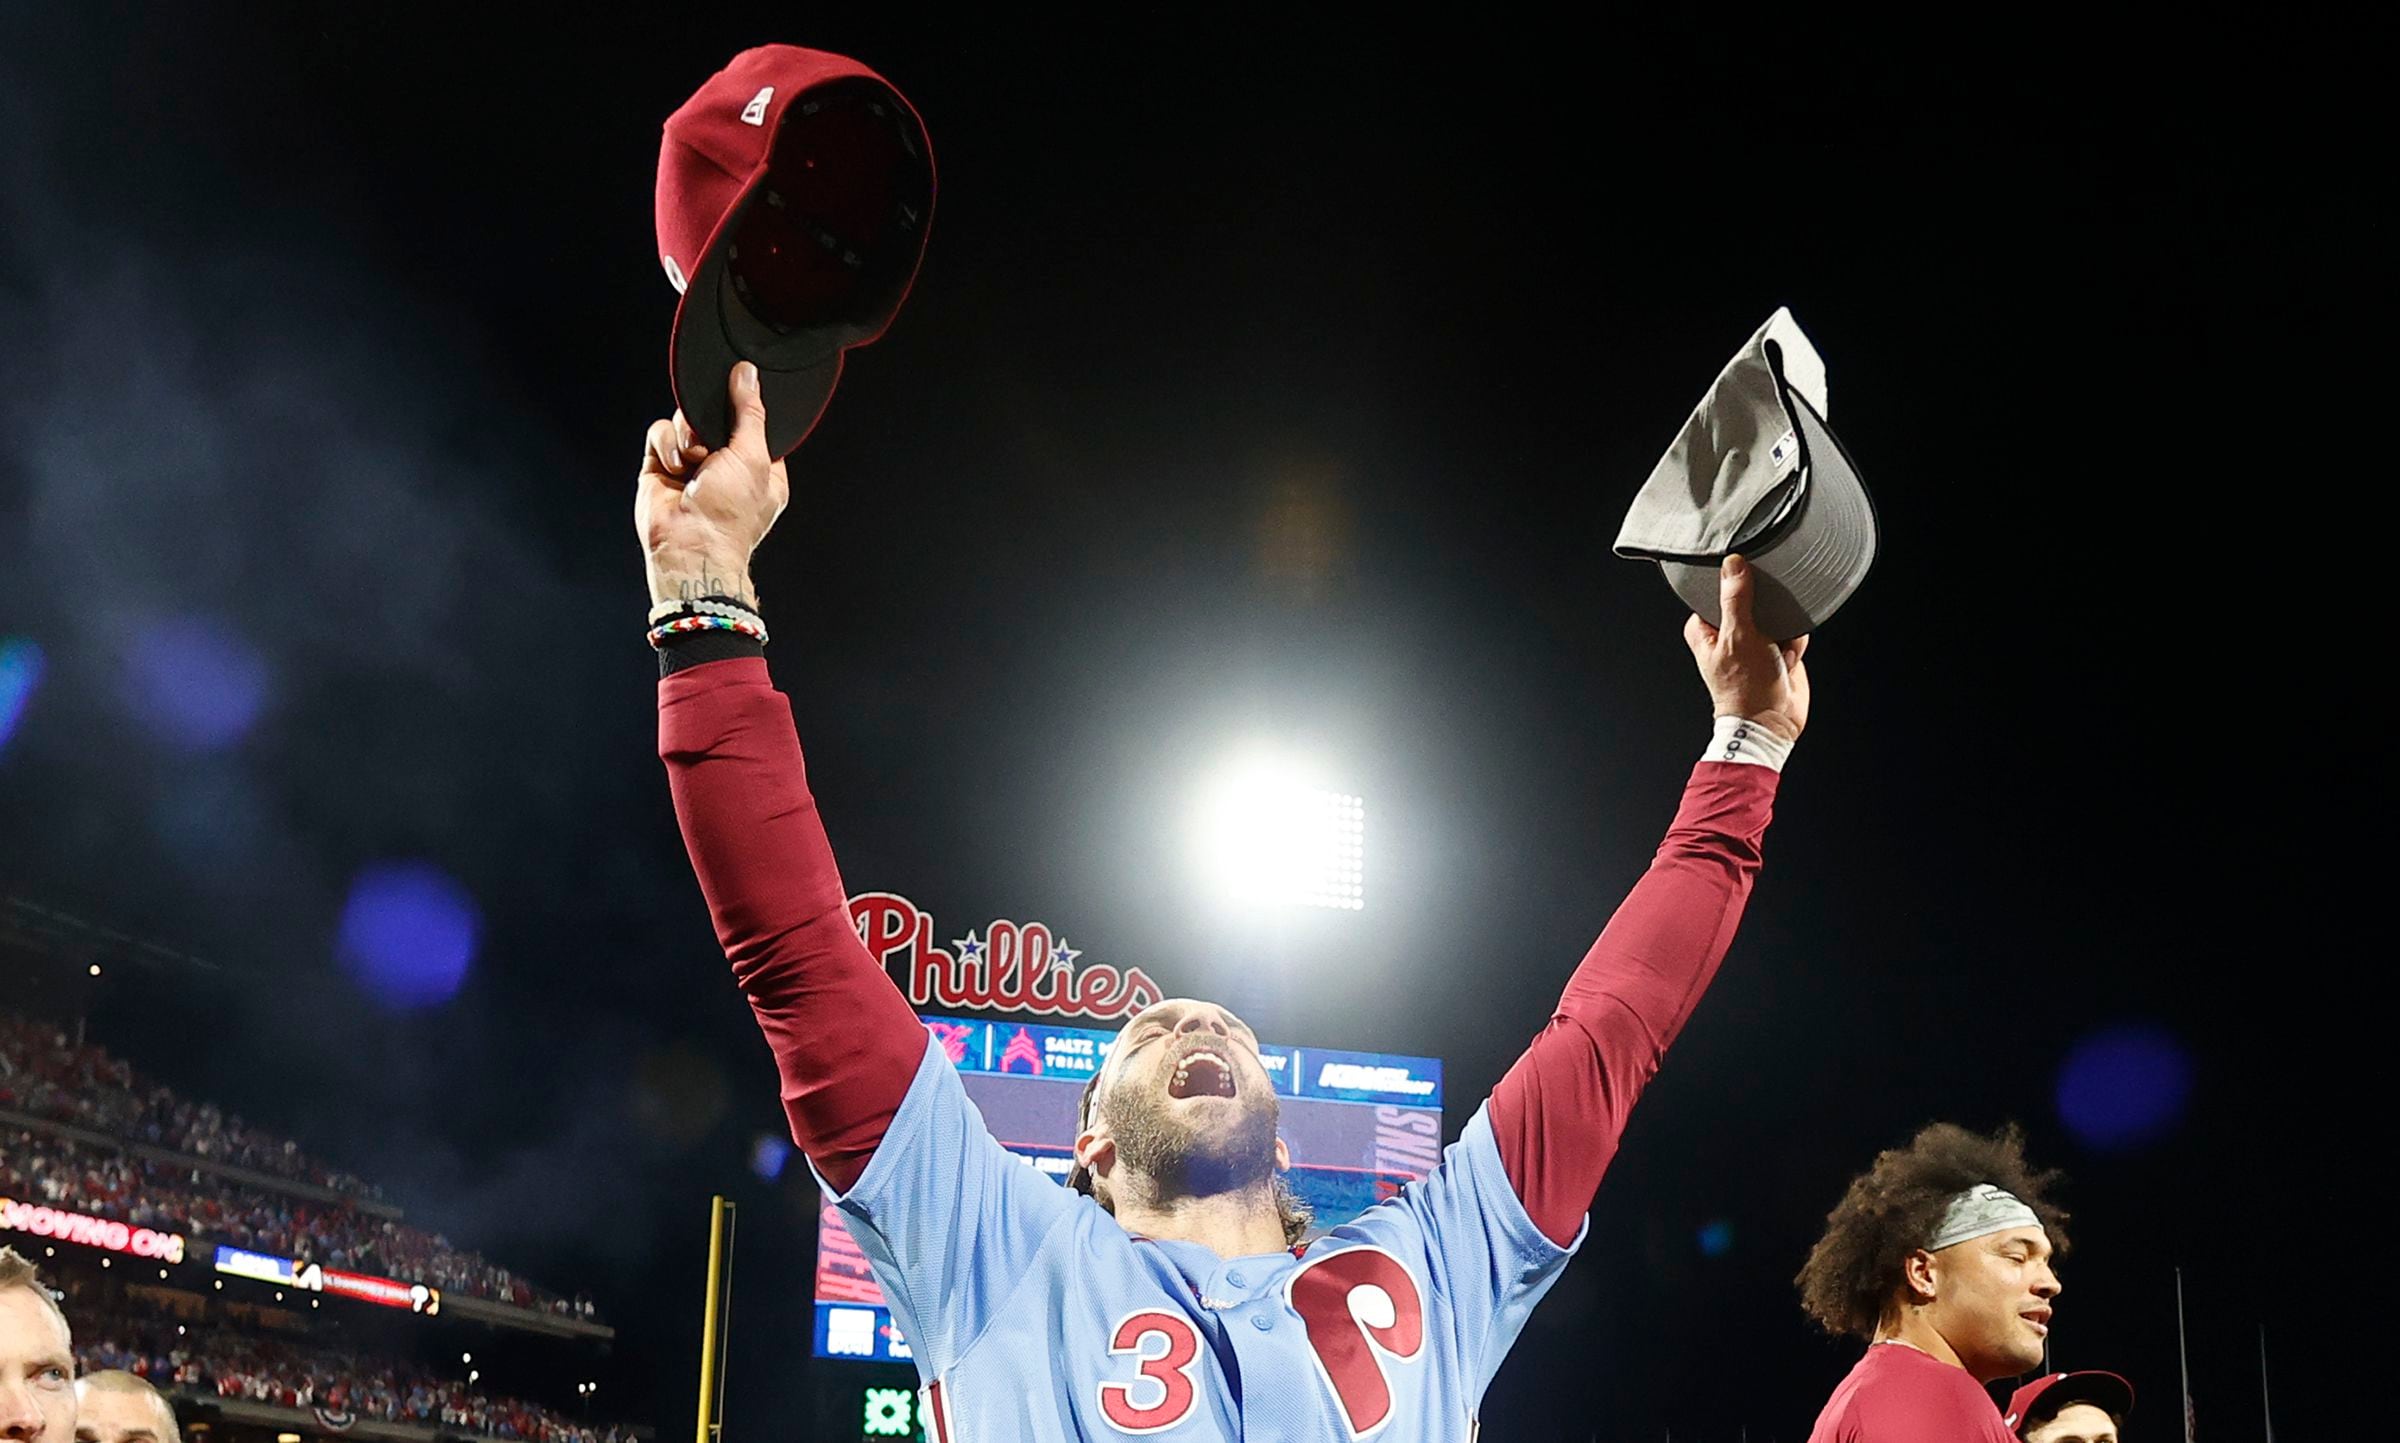 Phillies' bats go quiet during 2-1 loss to Diamondbacks in Game 3 of NL  Championship Series, Tampa Bay Buccaneers